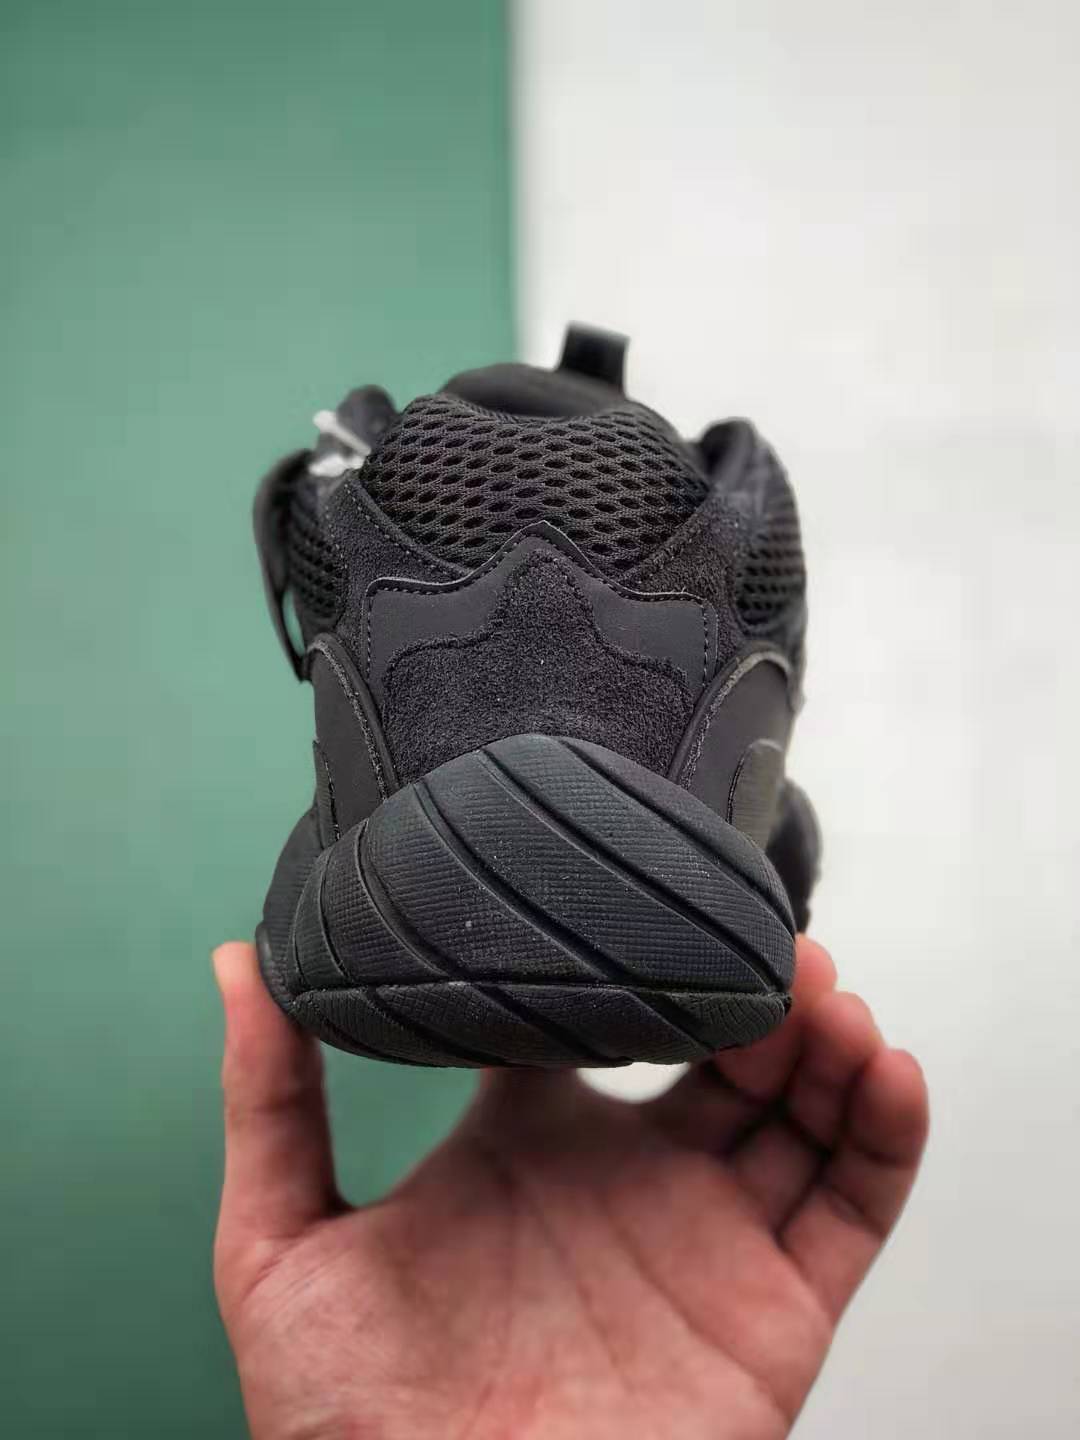 Adidas Yeezy 500 Utility Black - Iconic Sneakers for Sale